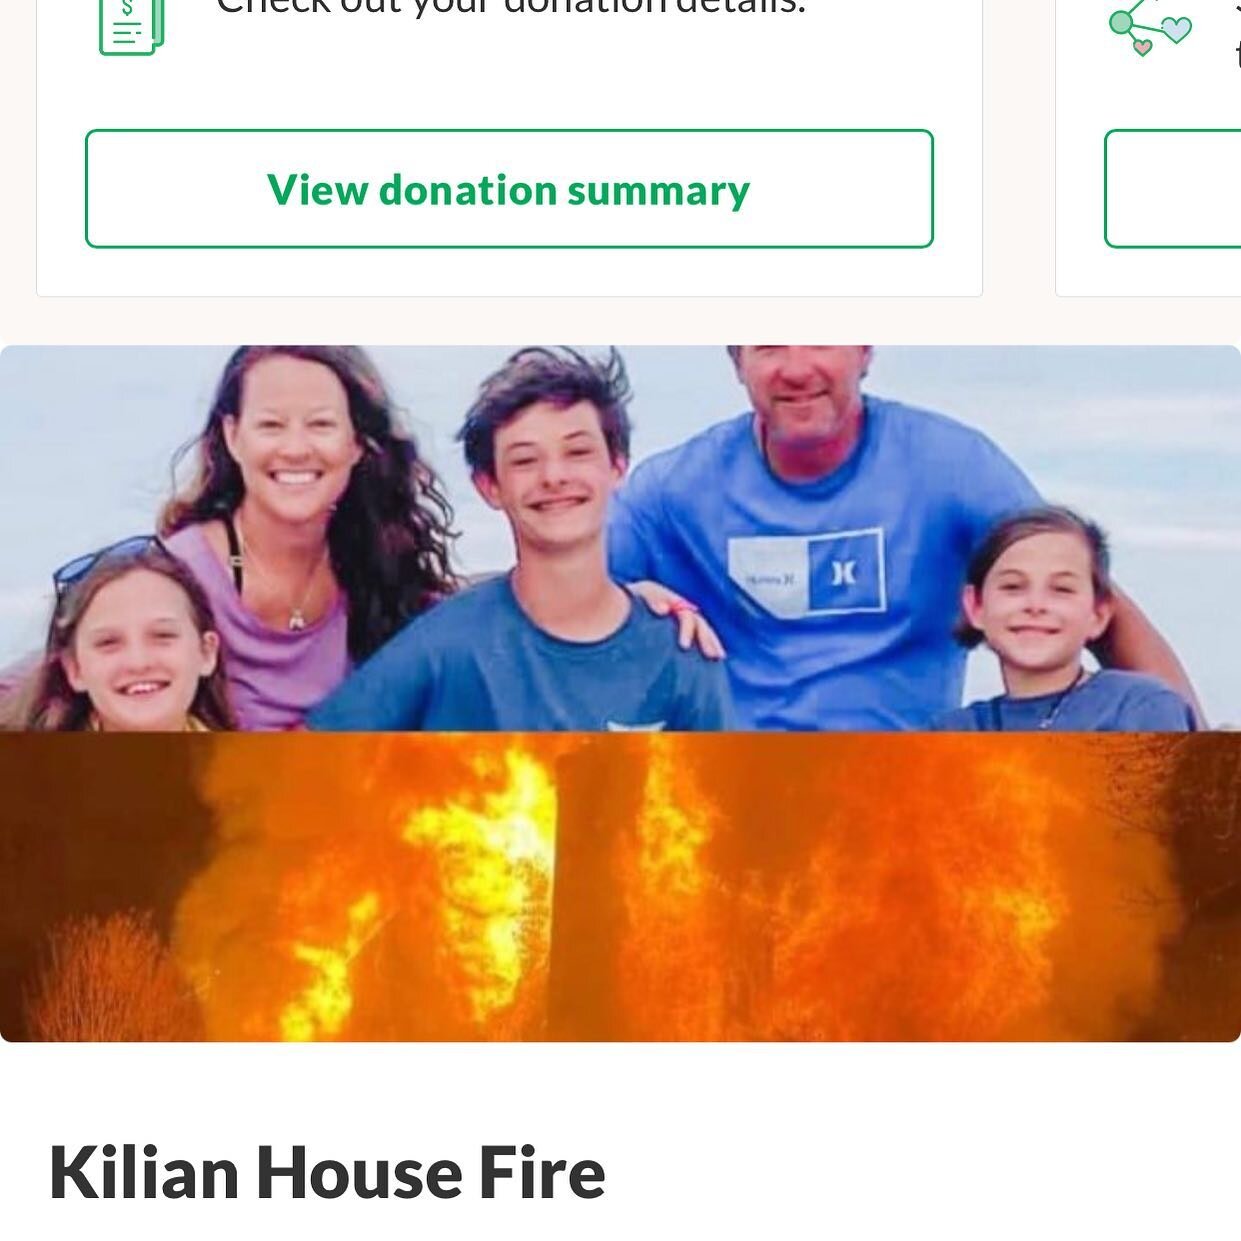 Our friends  with kids my girls ages had a devastating house fire last night. They lost everything. Cars. House. All of their belongings. And so close to the holidays. If you can spare anything at all to help them get back on their feet it would be g